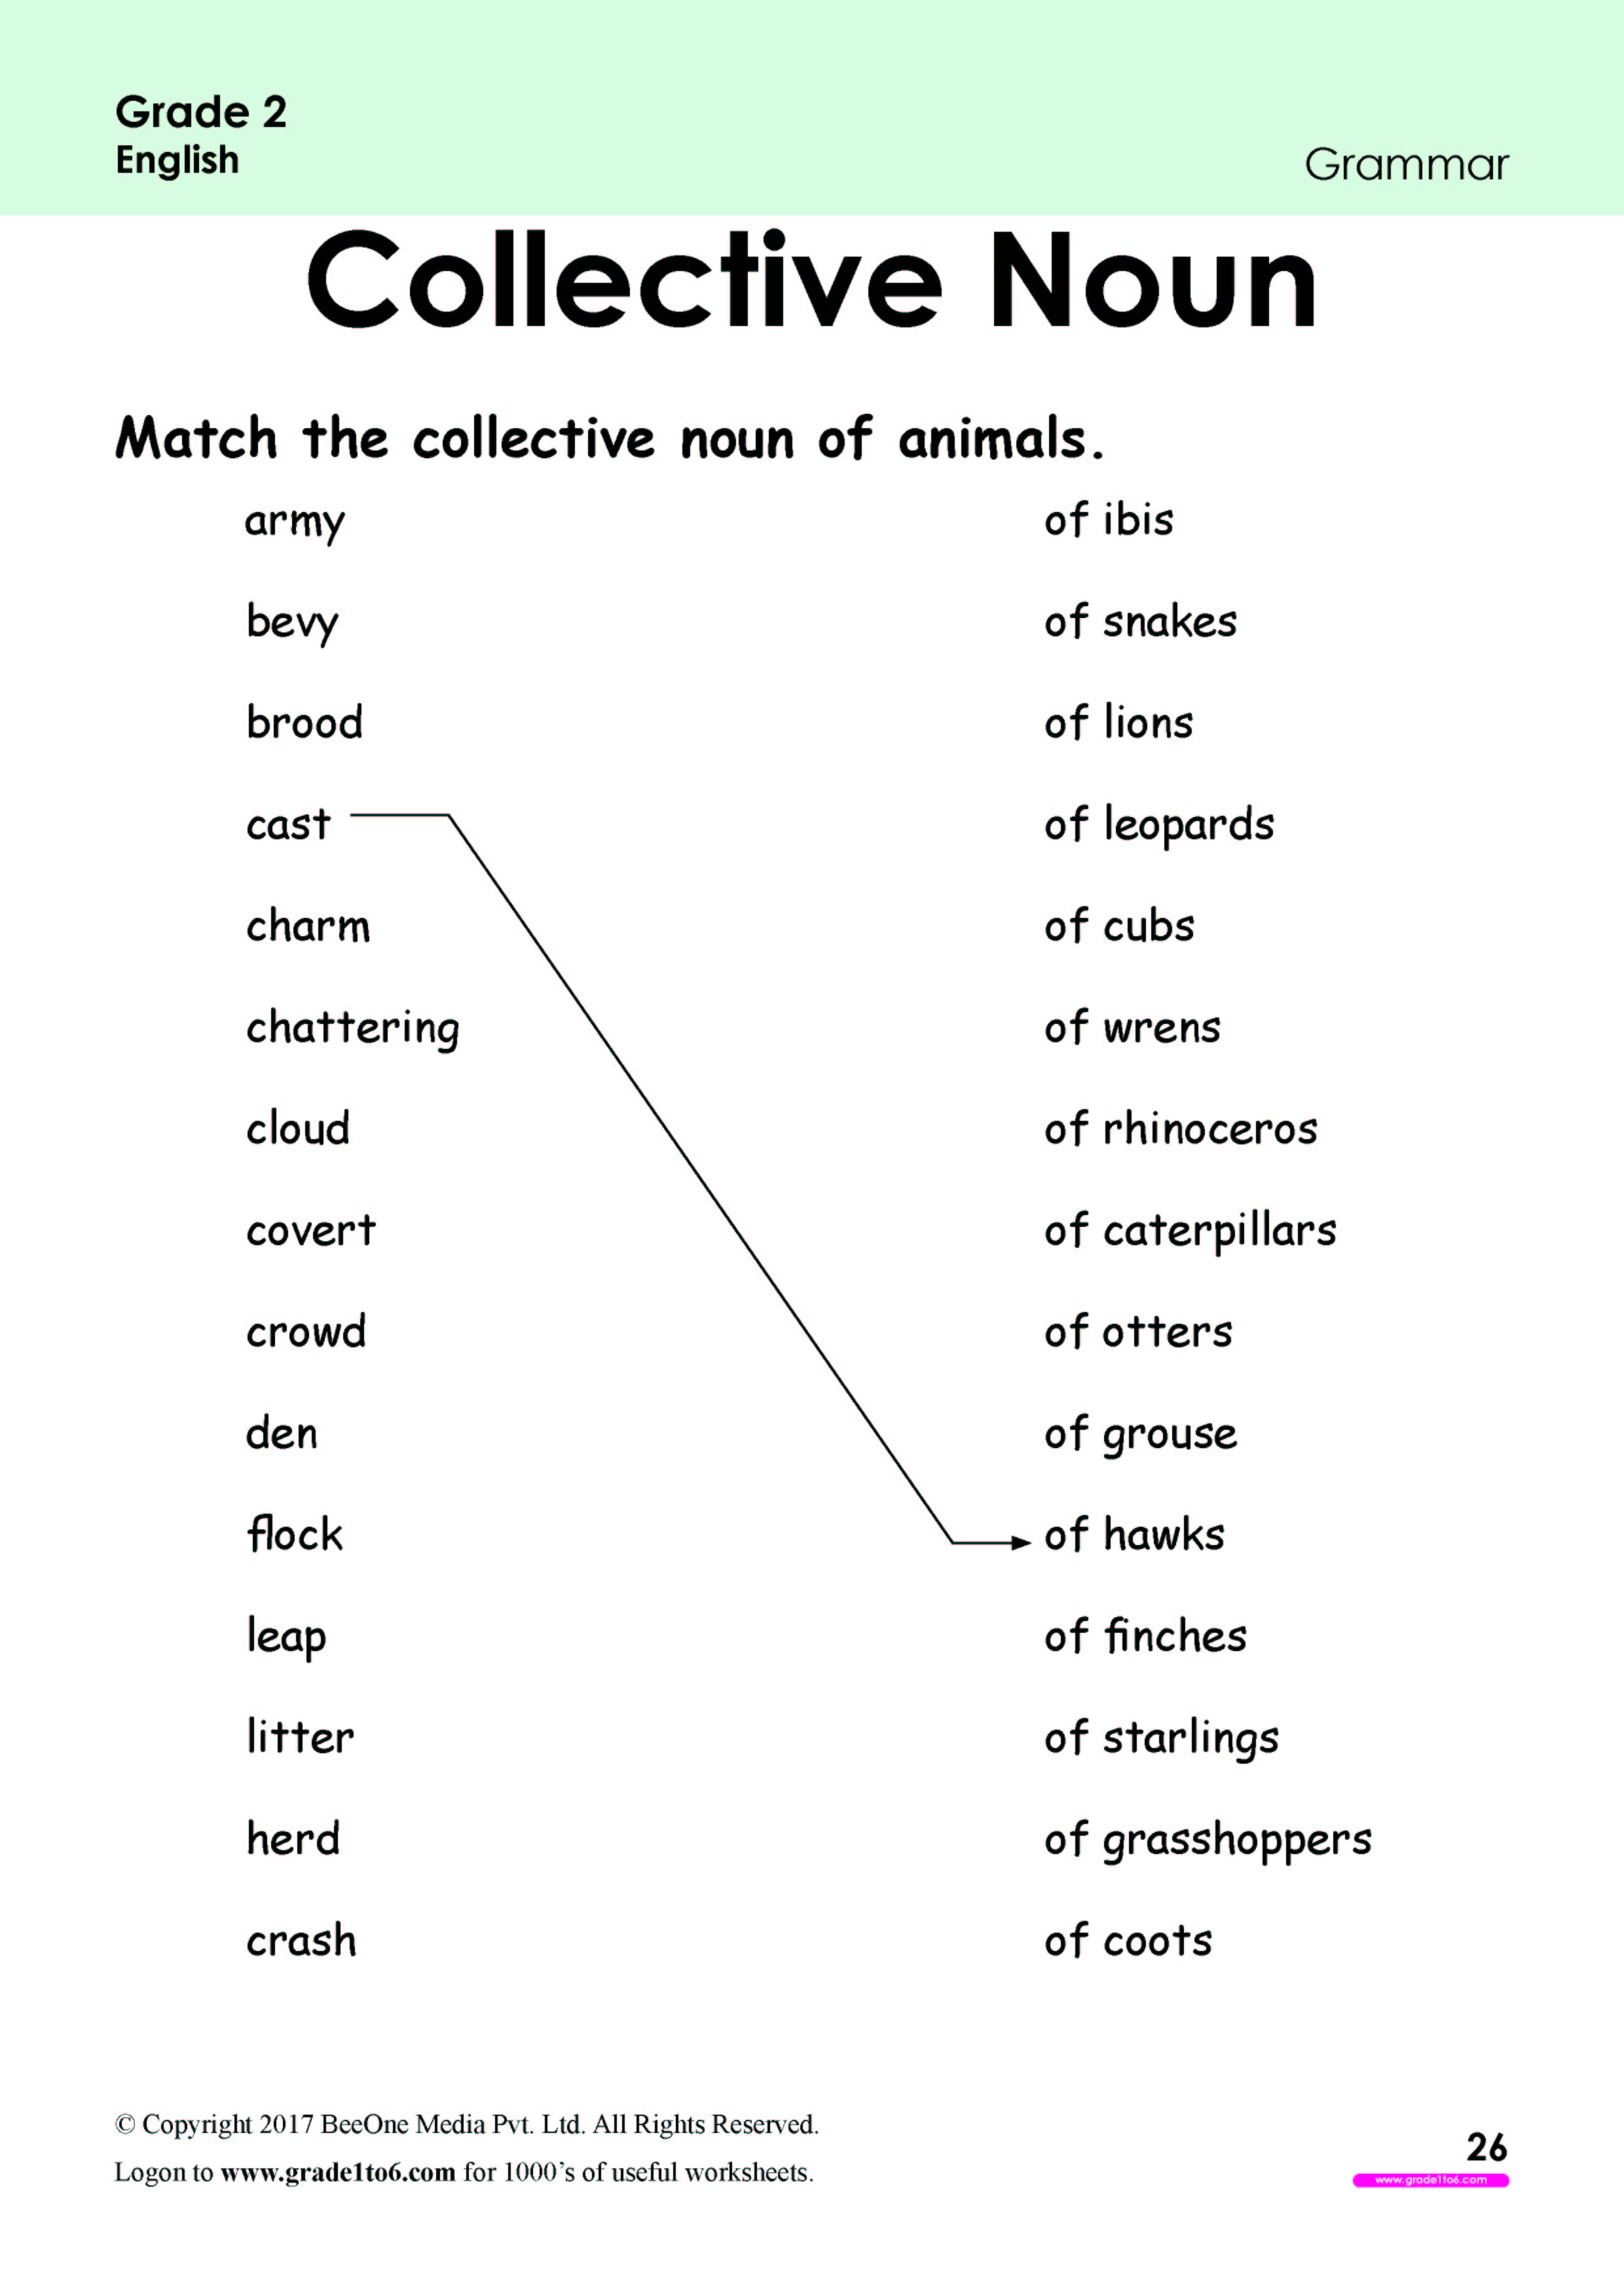 Collective Noun Worksheets For Class 4